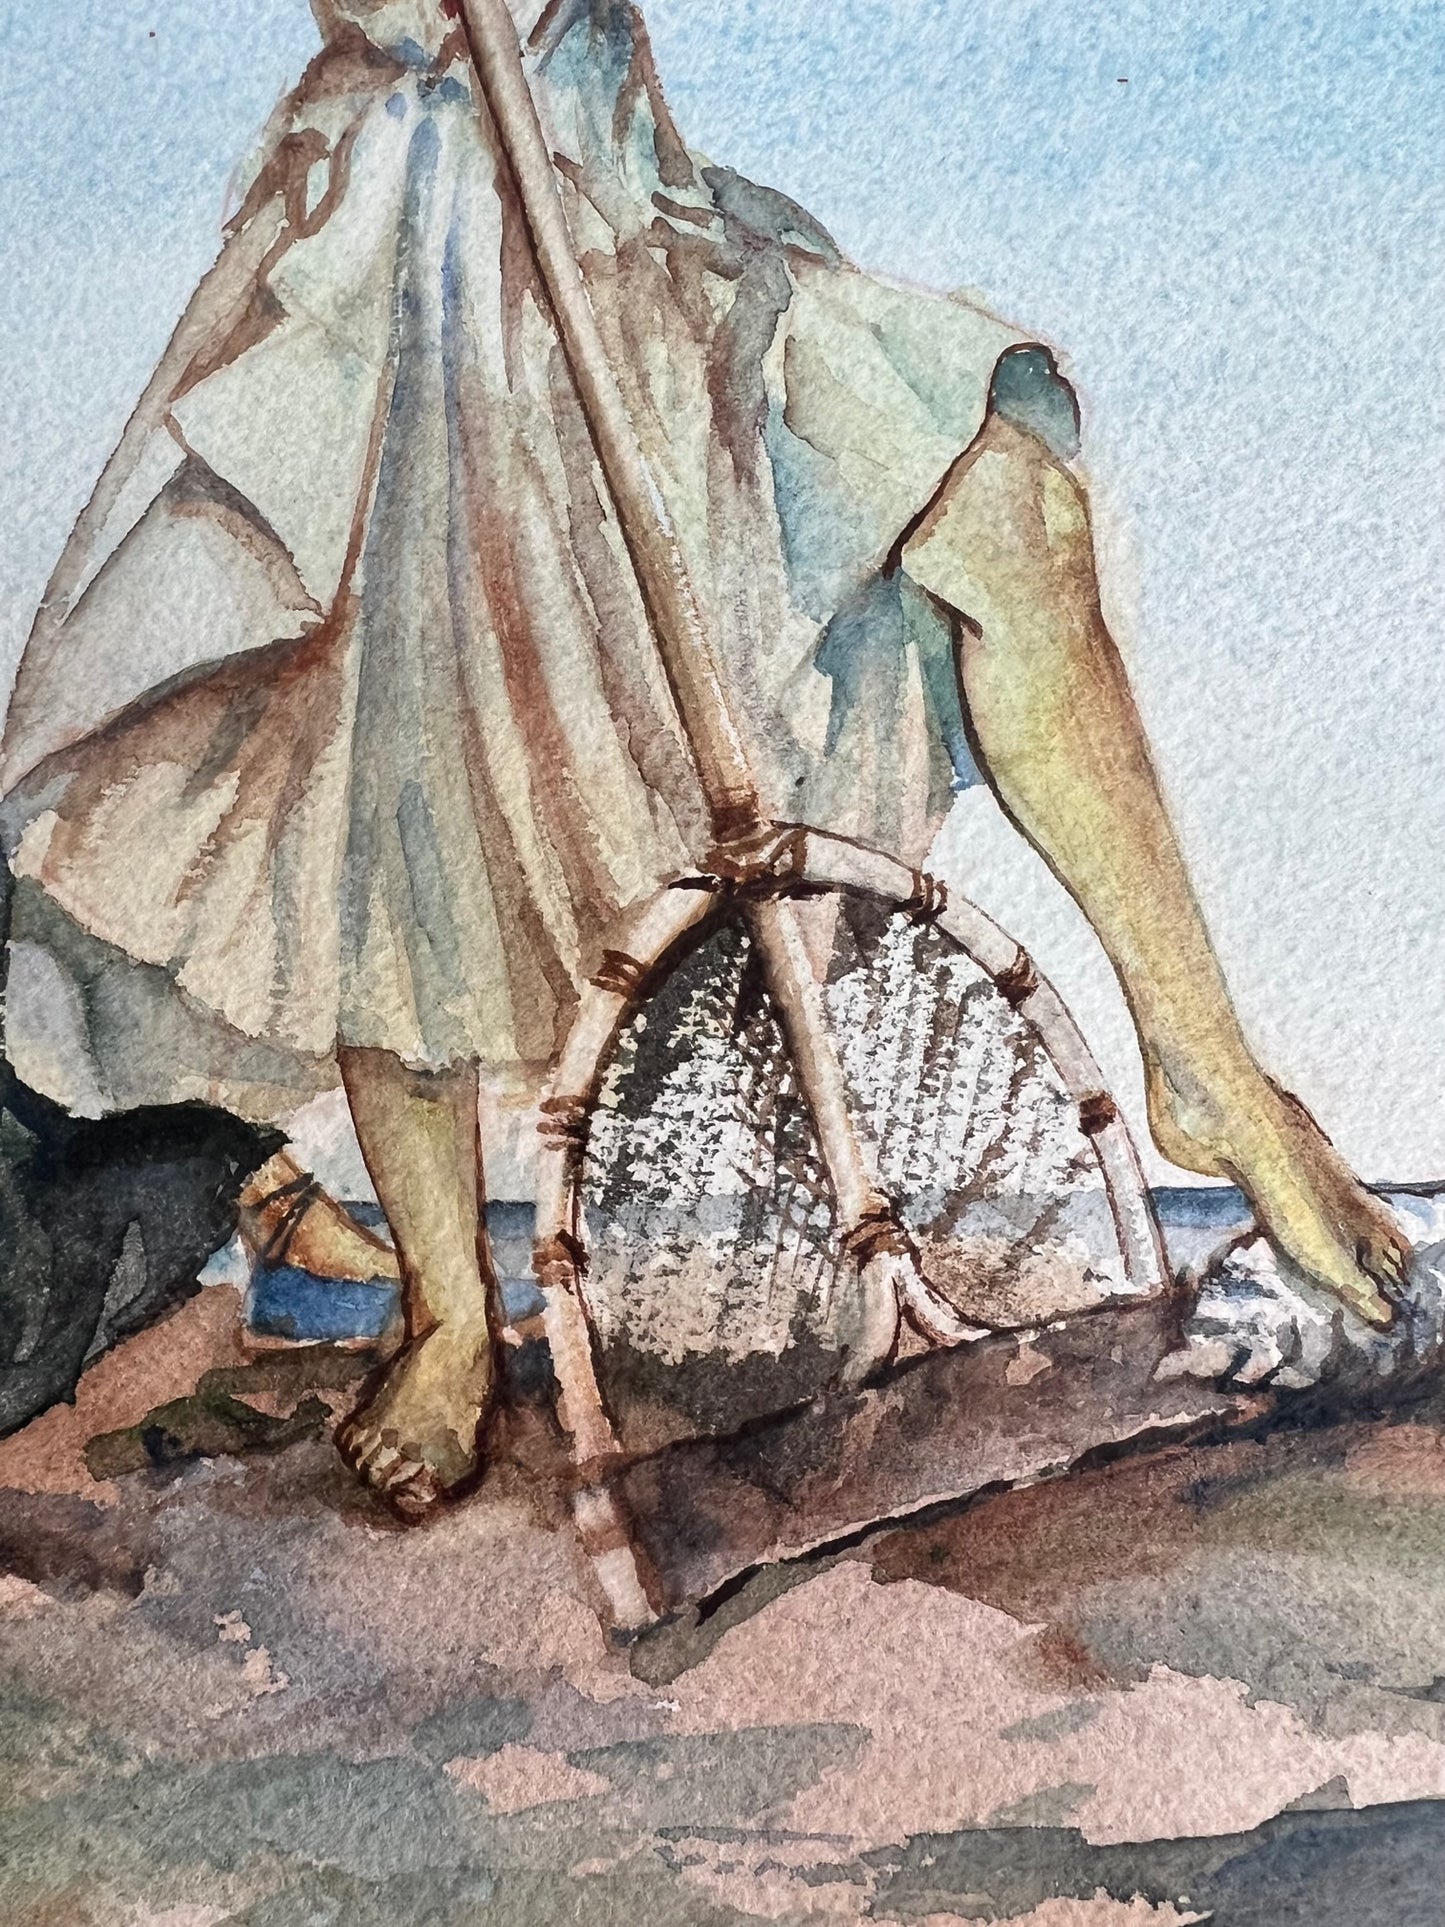 High quality watercolour After William Russell Flint